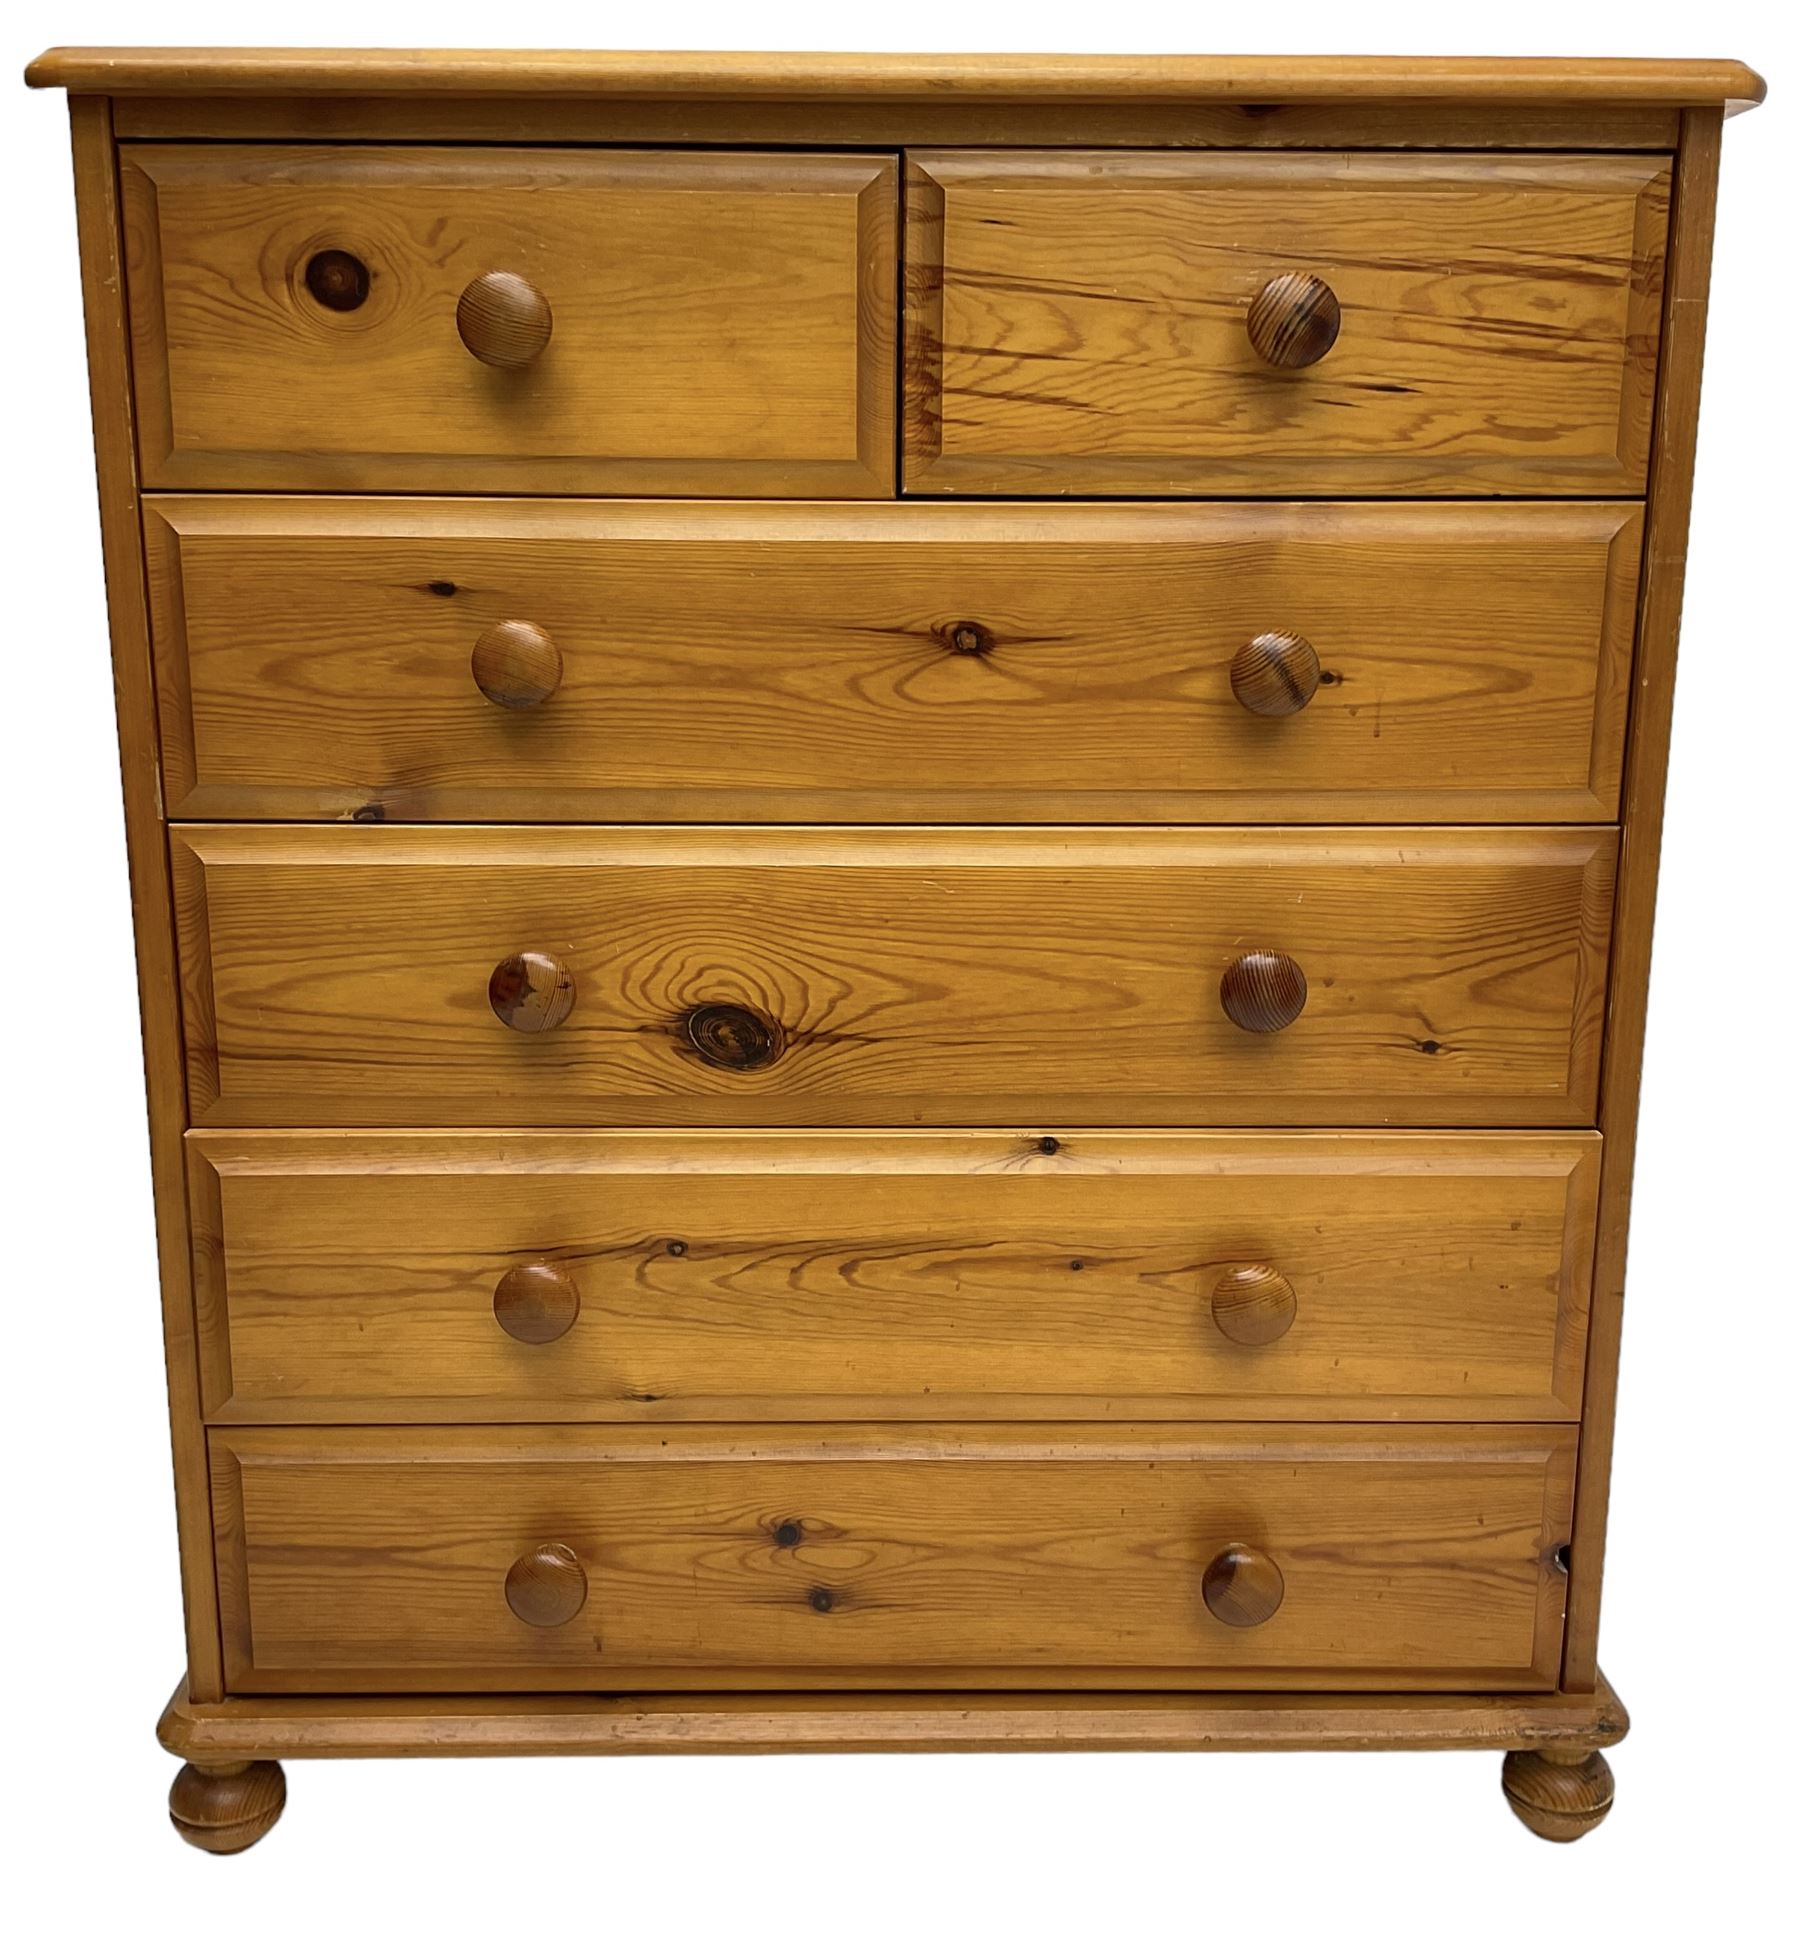 Polished pine chest - Image 12 of 12